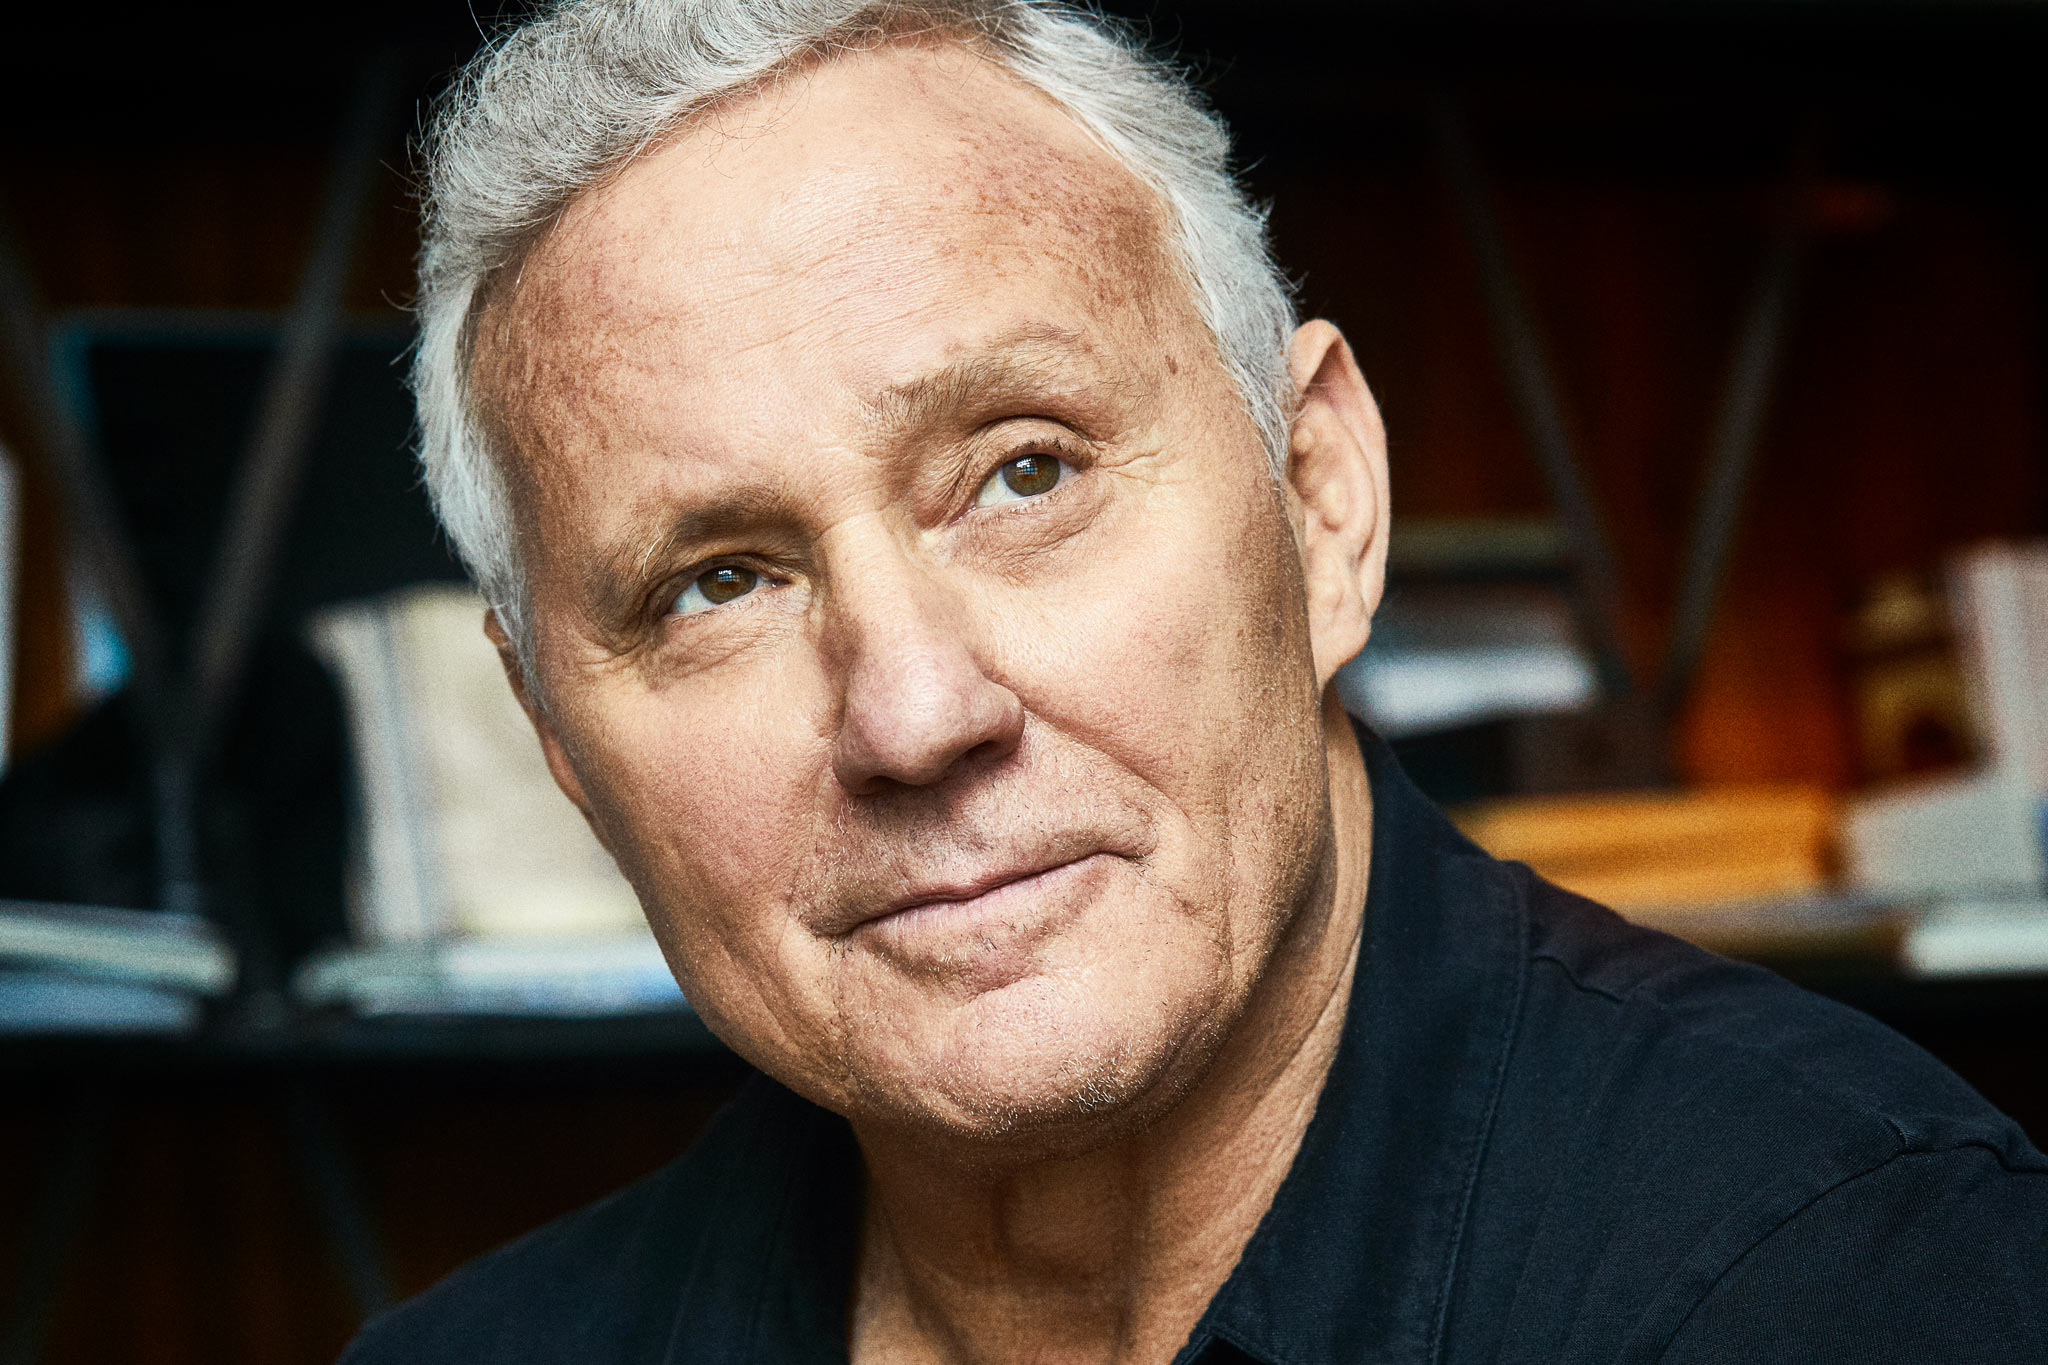 Ian Schrager. Photo: Aaron Richter/Contour by Getty Images